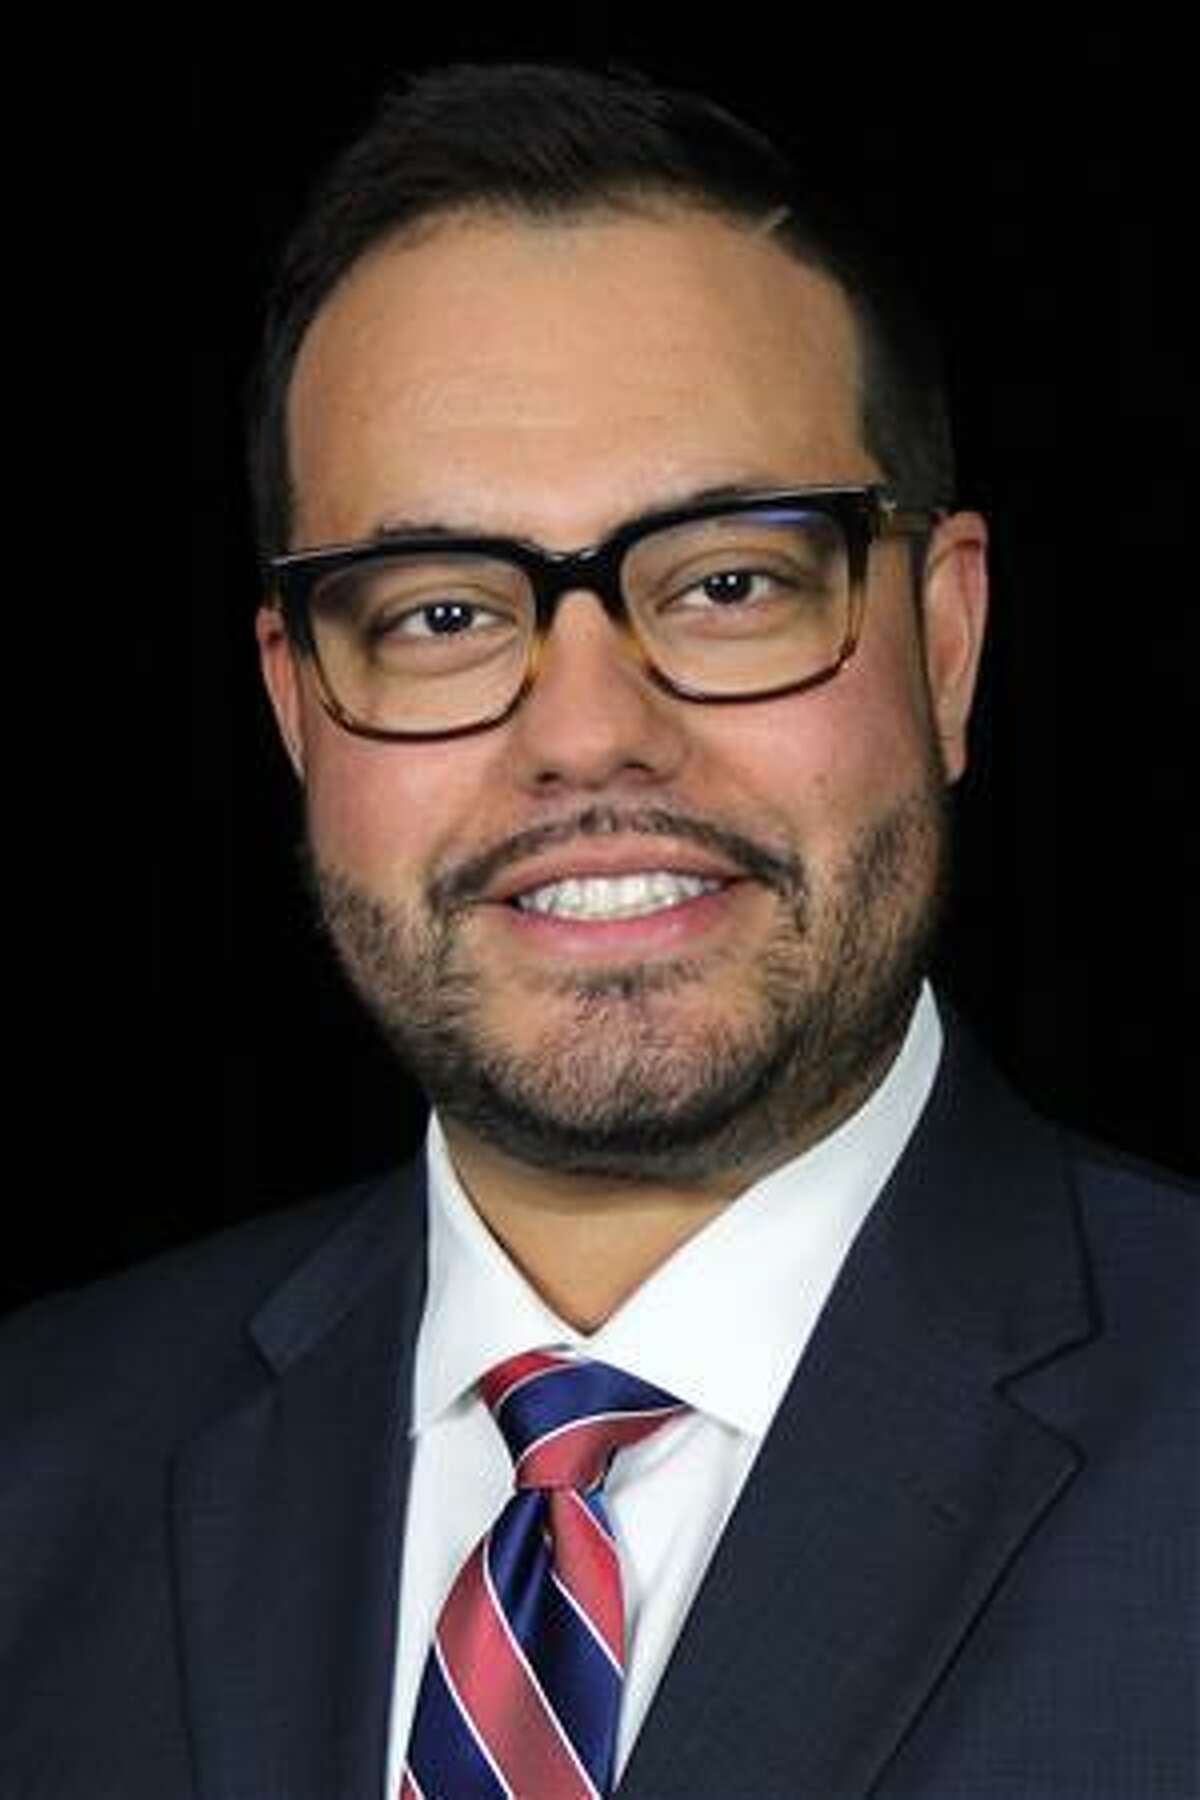 Rafael Diaz, 36, will rejoin Judson ISD’s board of trustees, this time as the District 7 trustee. He held the District 4 seat until November.